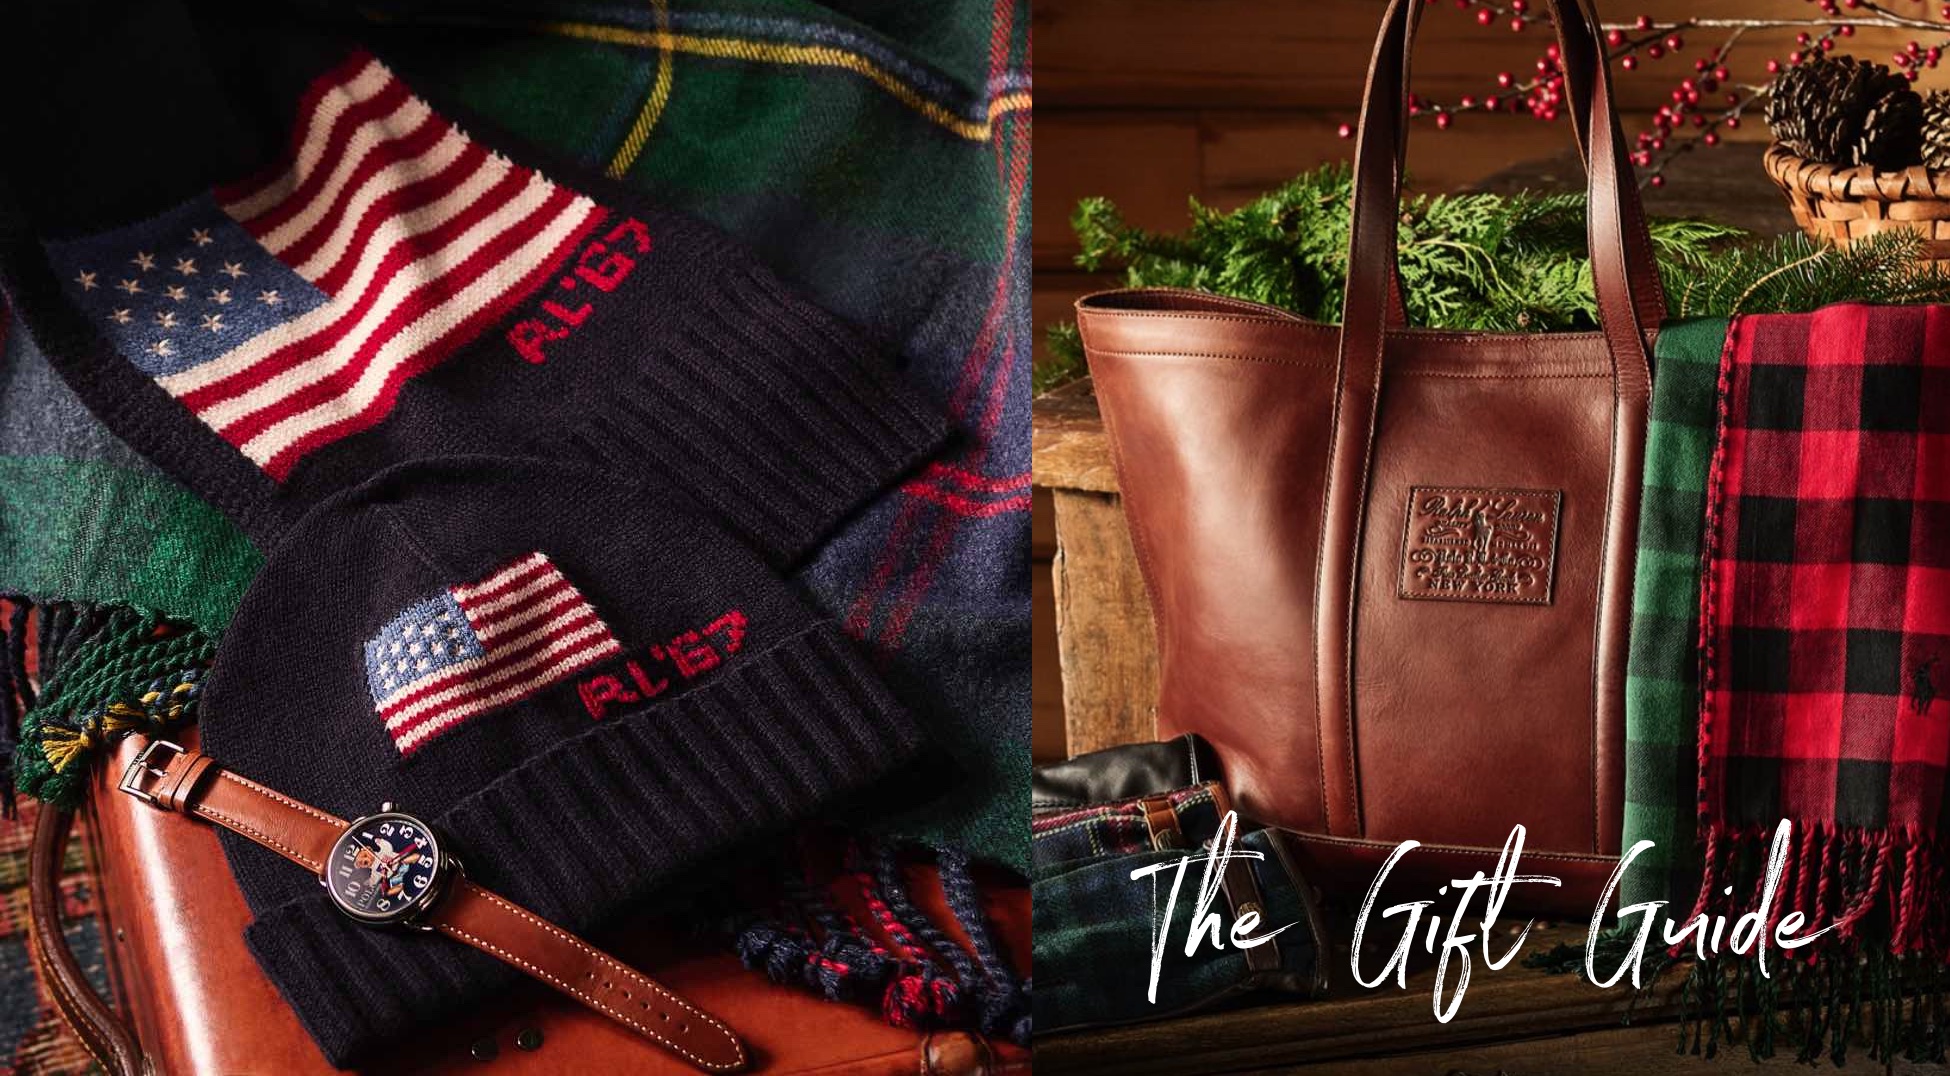 Ralph Lauren Releases Limited Edition Gifts for the Holidays